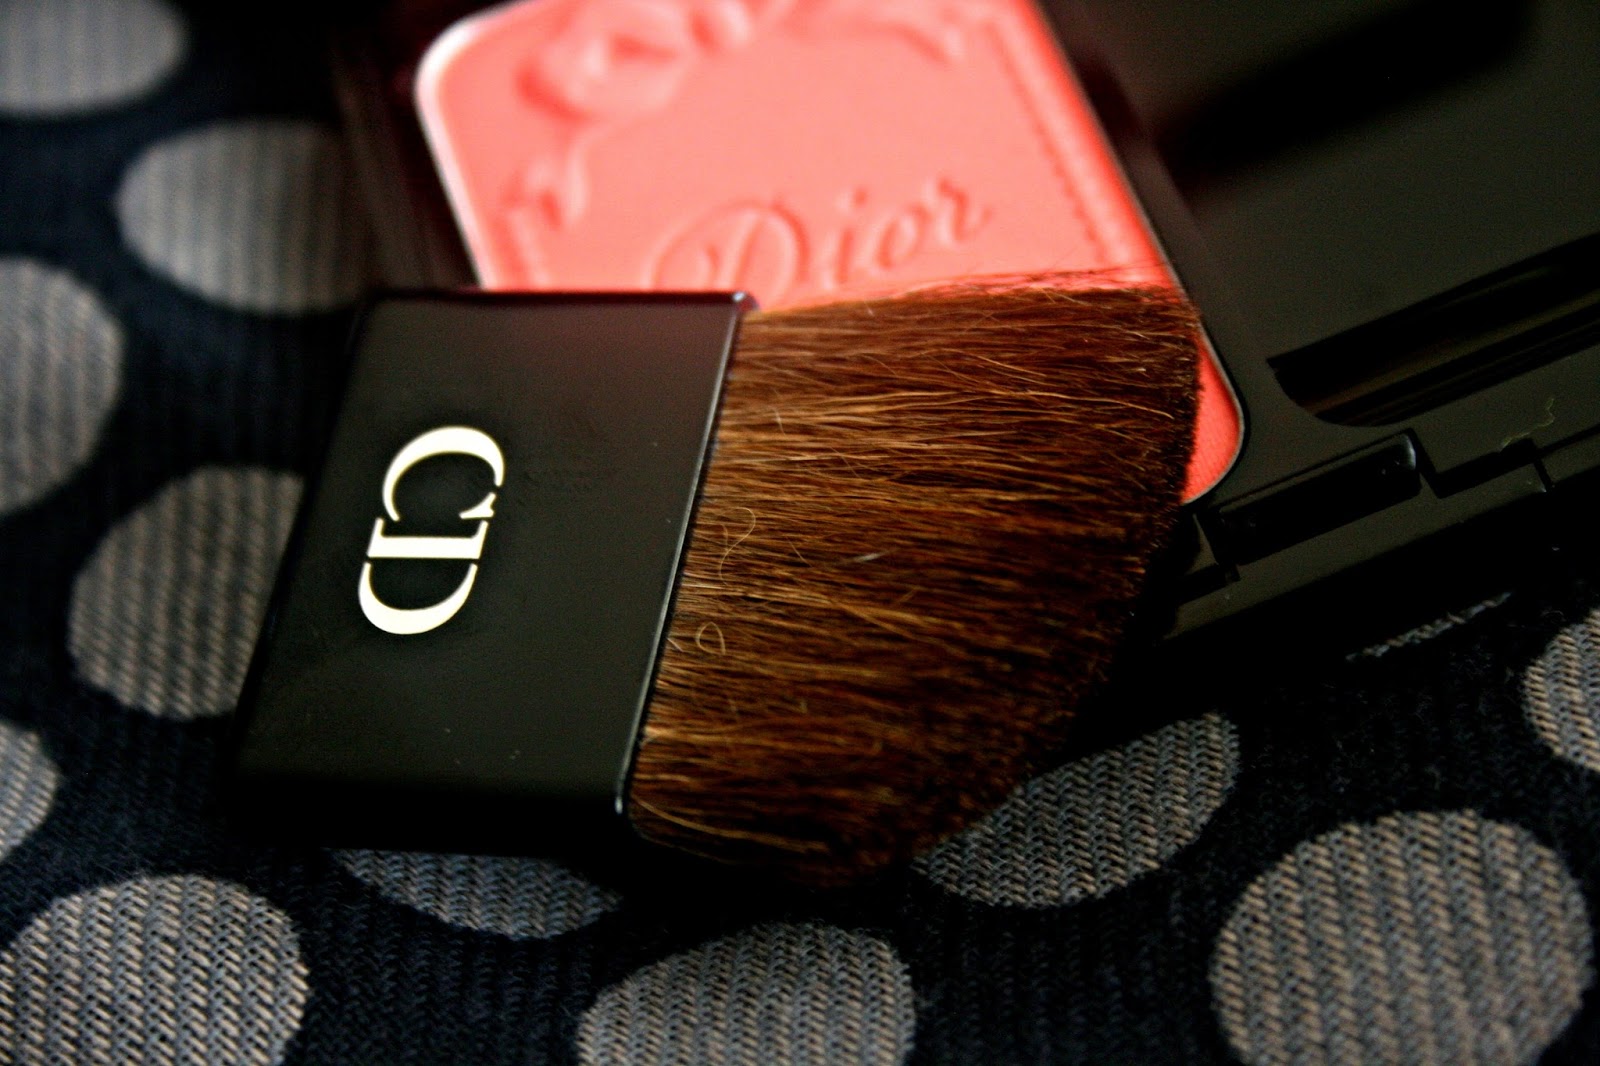 Dior Blush in Corail Bagatelle Review, Photos & Swatches